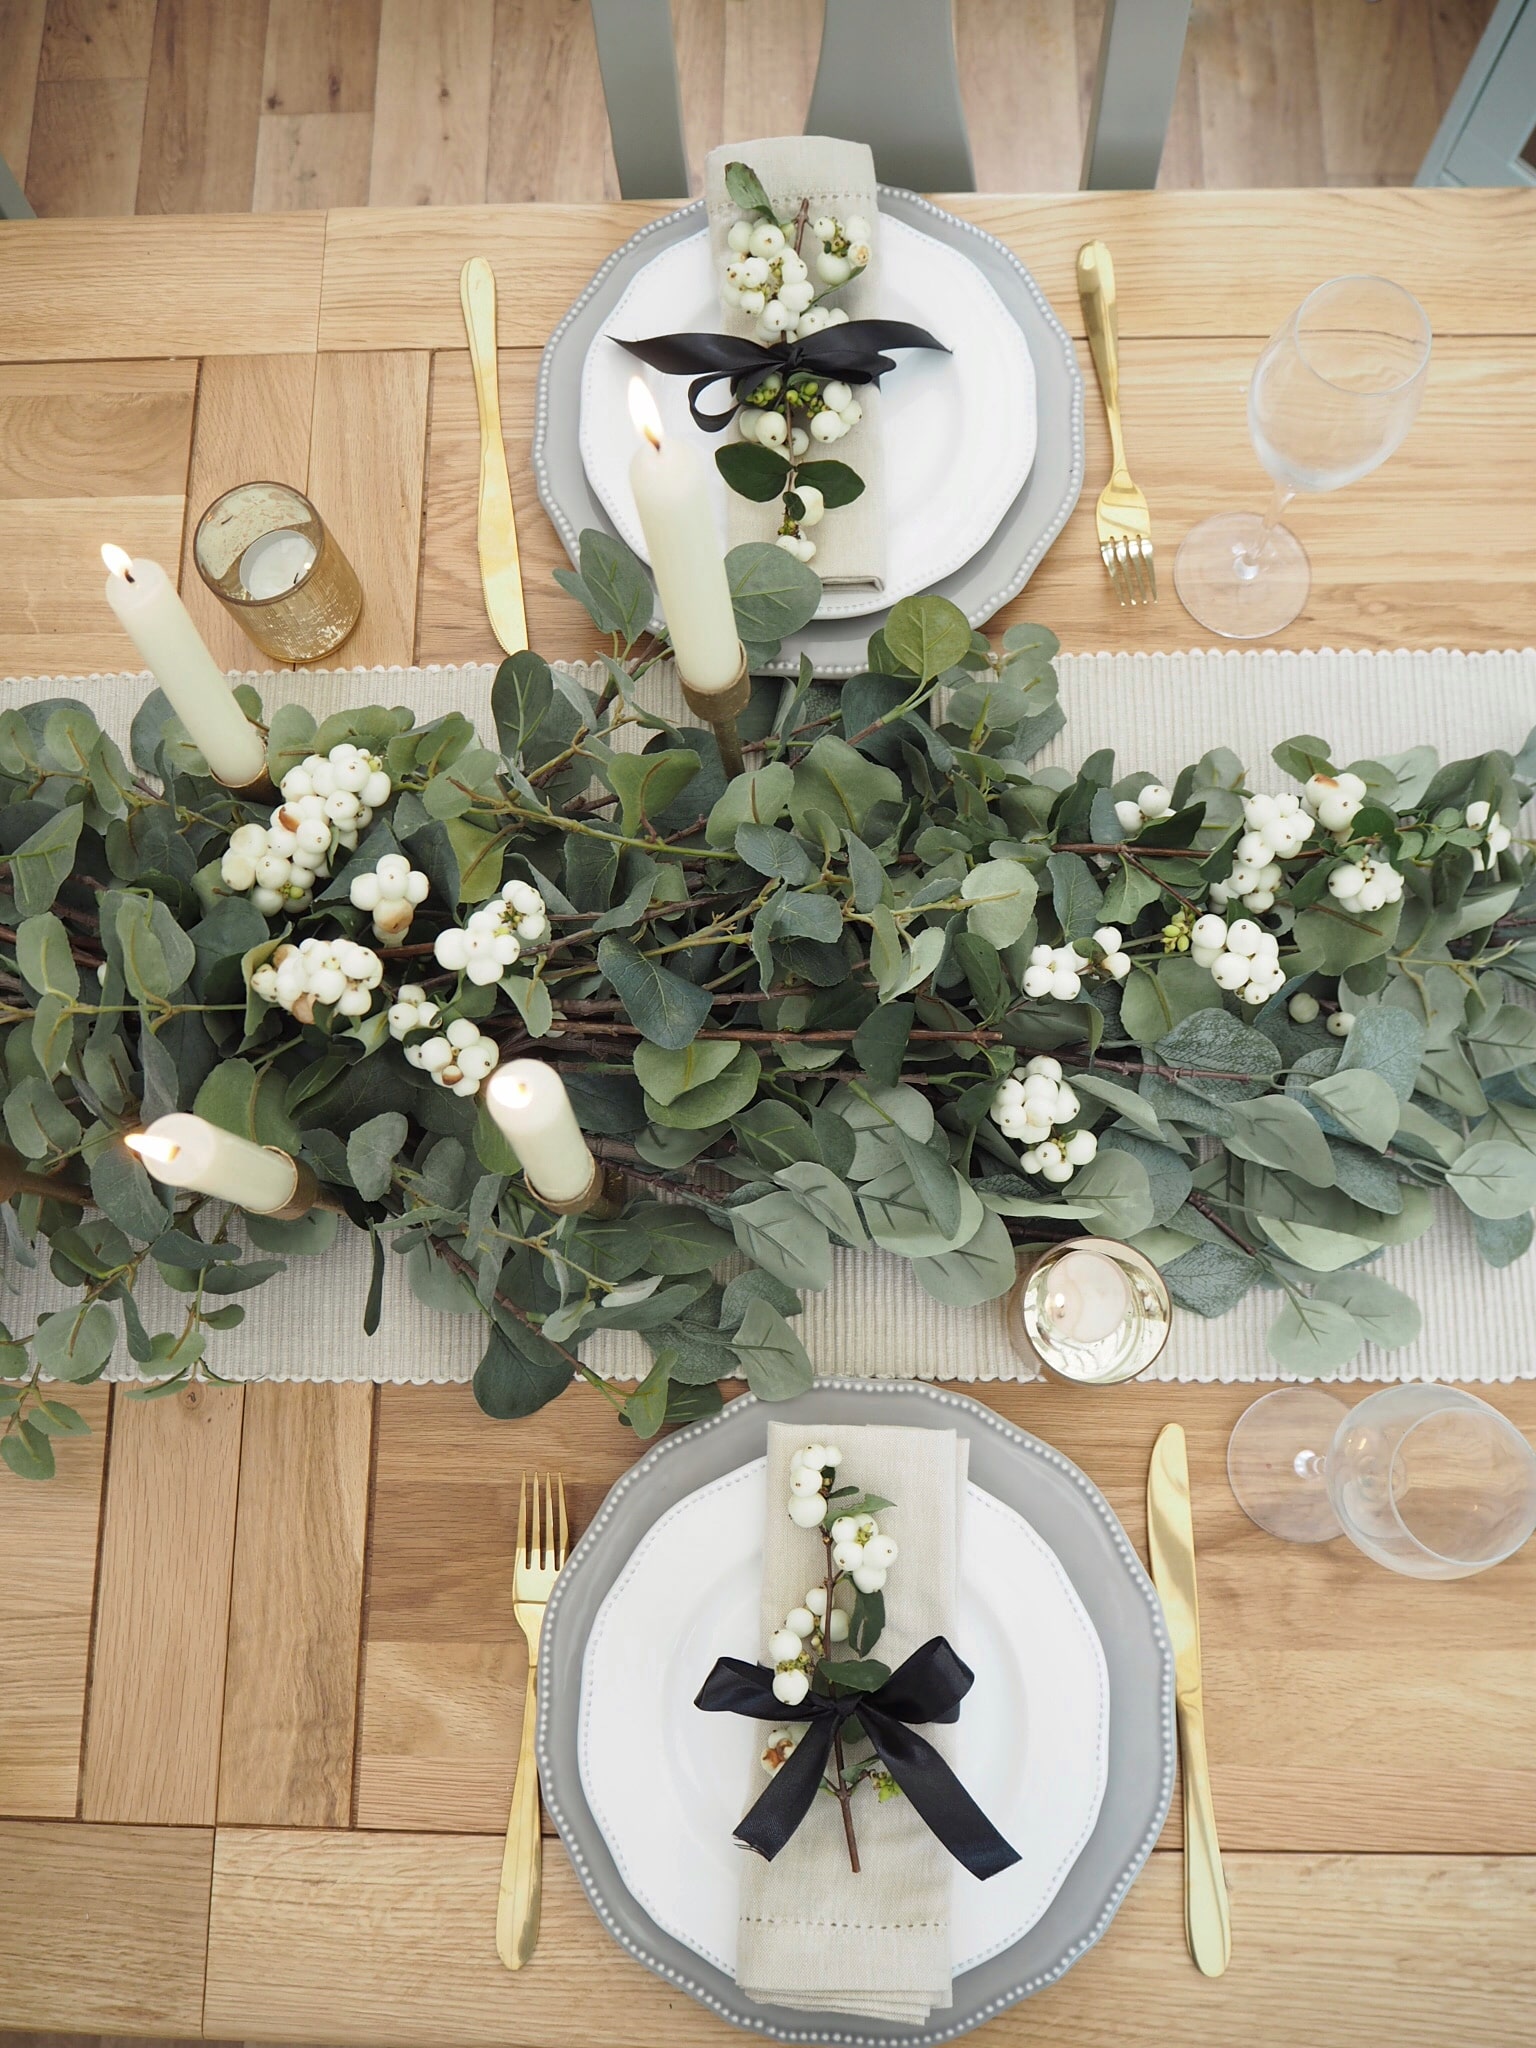 How to make a Eucalyptus garland for your Christmas dining table | Dove ...